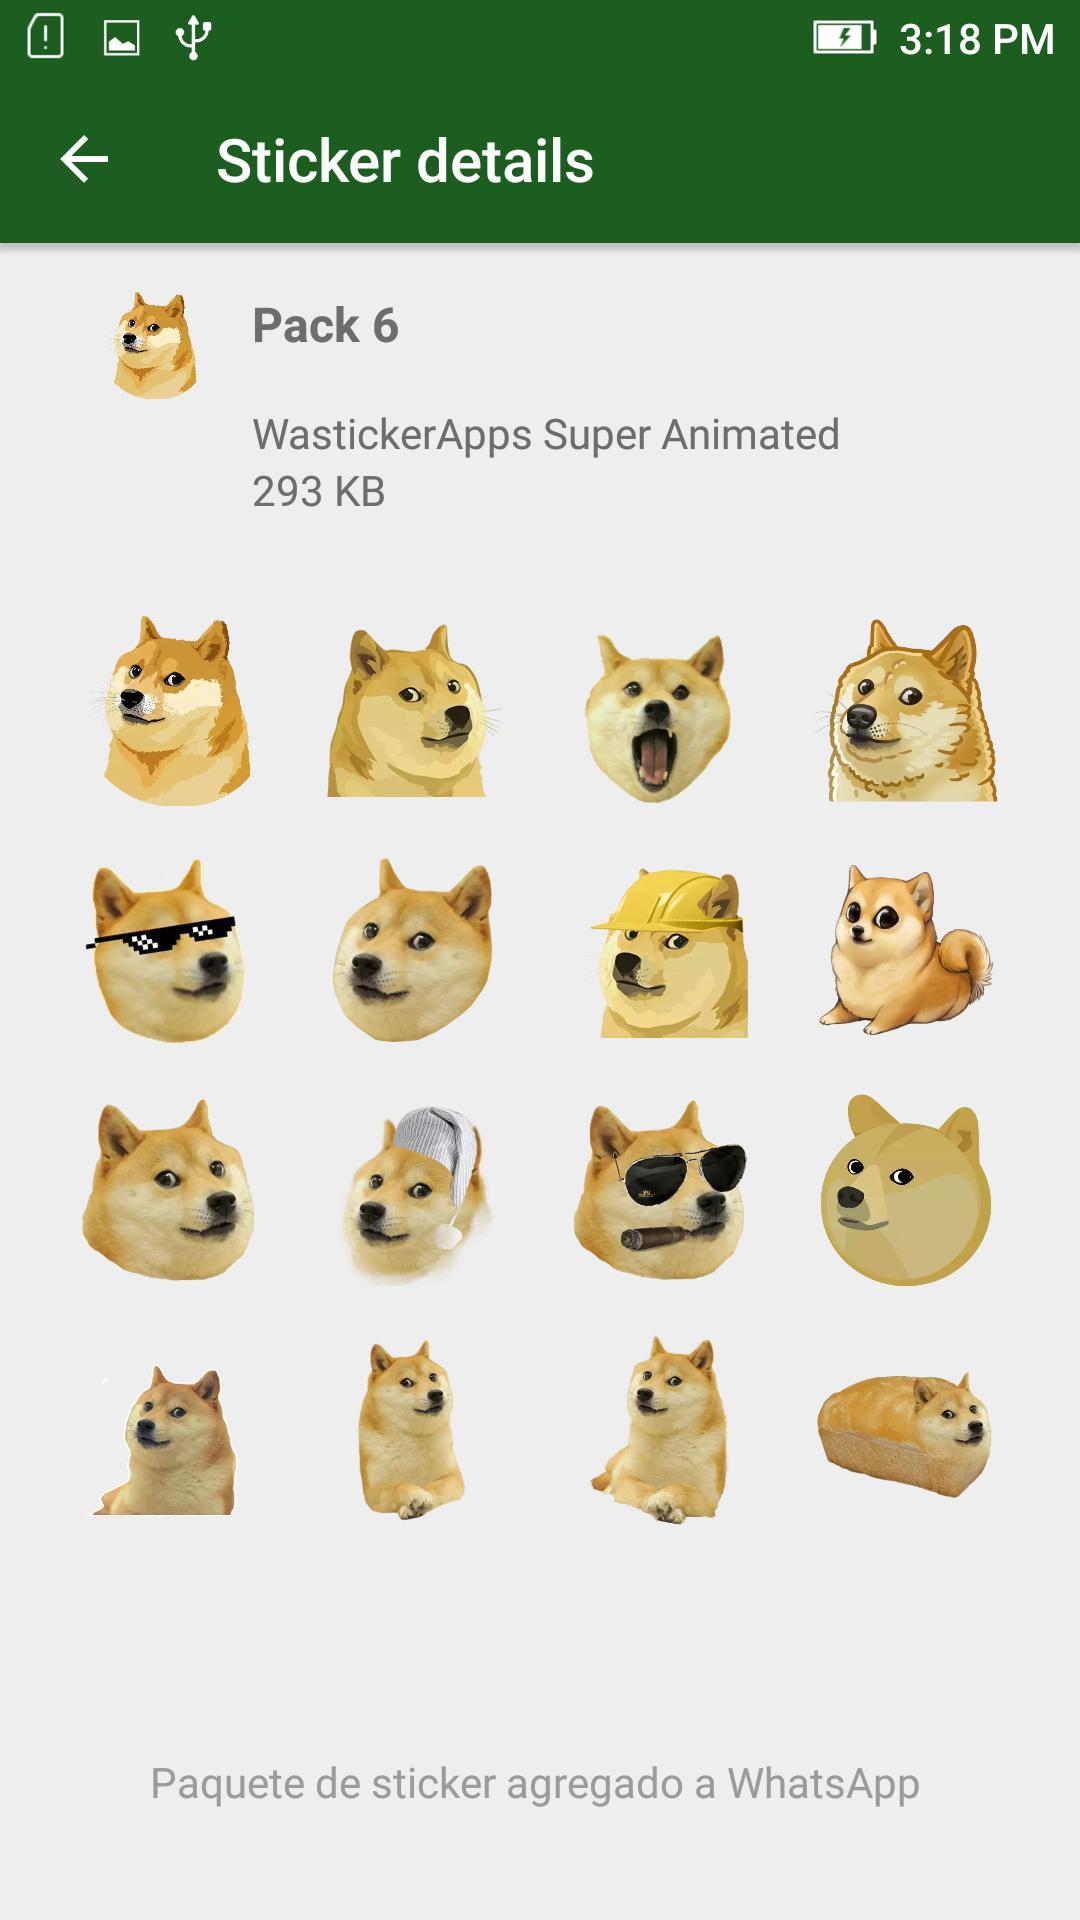 New Dog Memes Stickers Wastickerapps For Android Apk Download - doge boss roblox